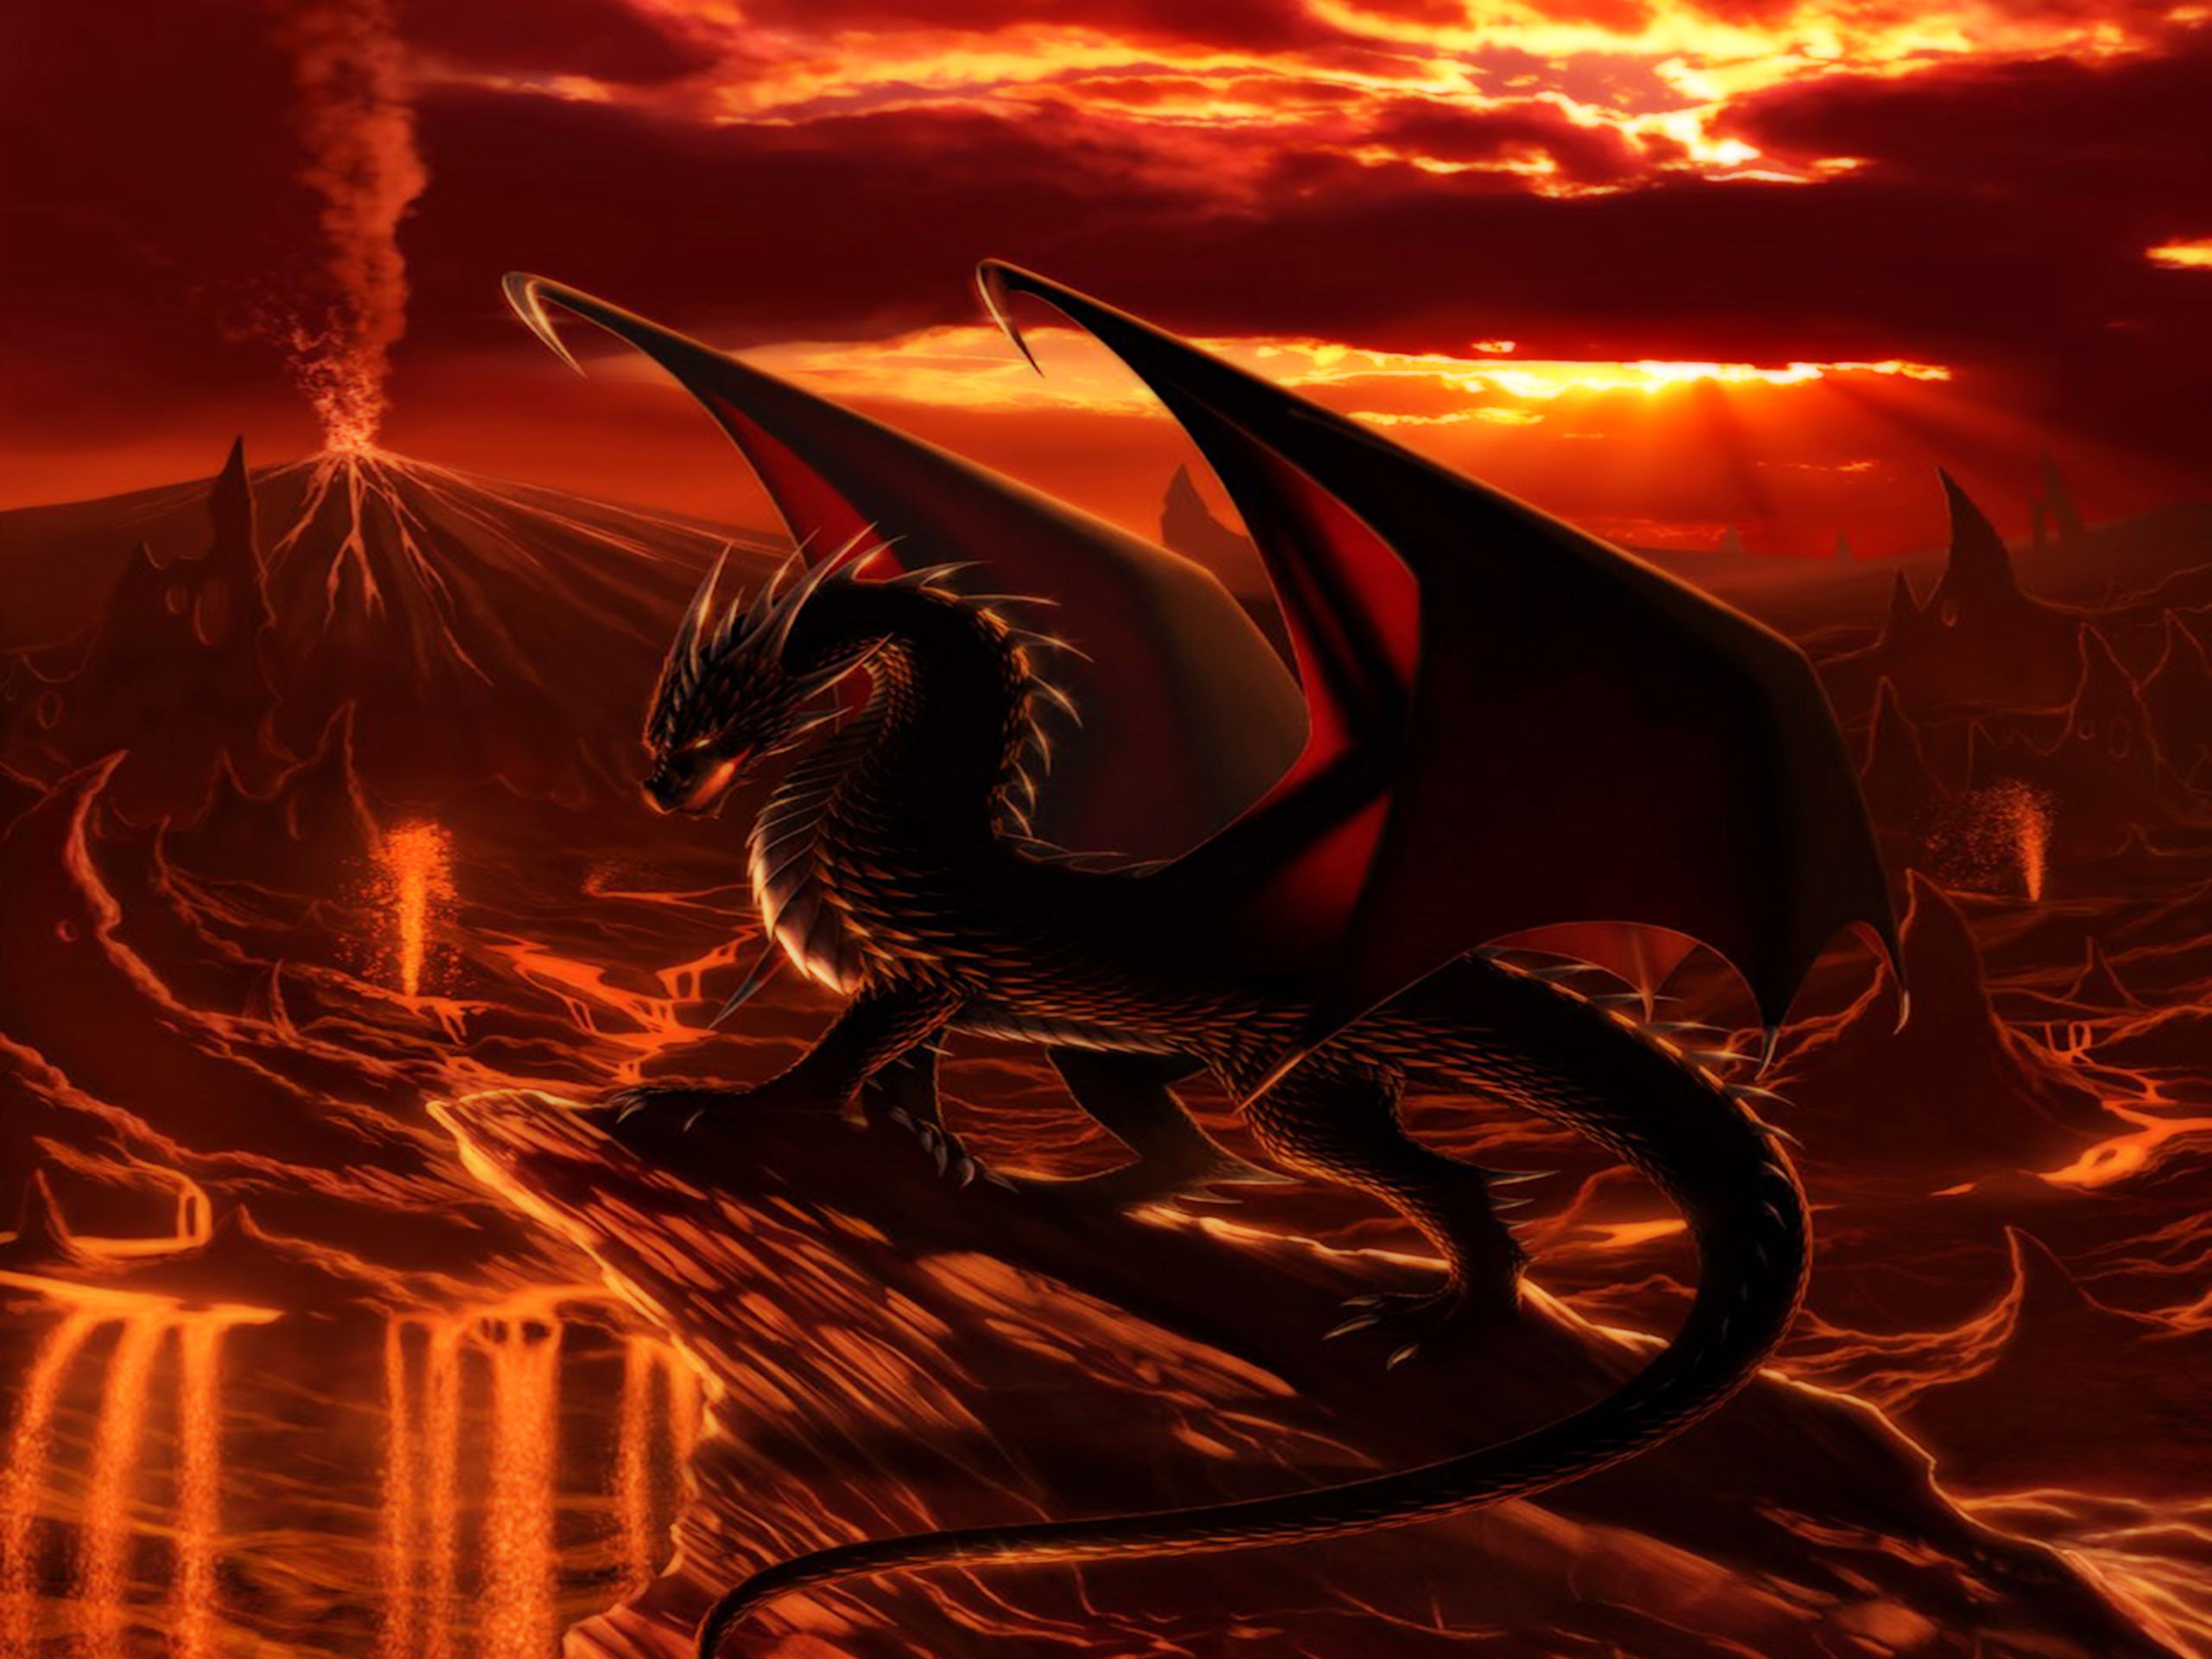 dragon wallpapers tag page 11 of 12 amazing wallpaperz dragon wallpapers tag page 11 of 12